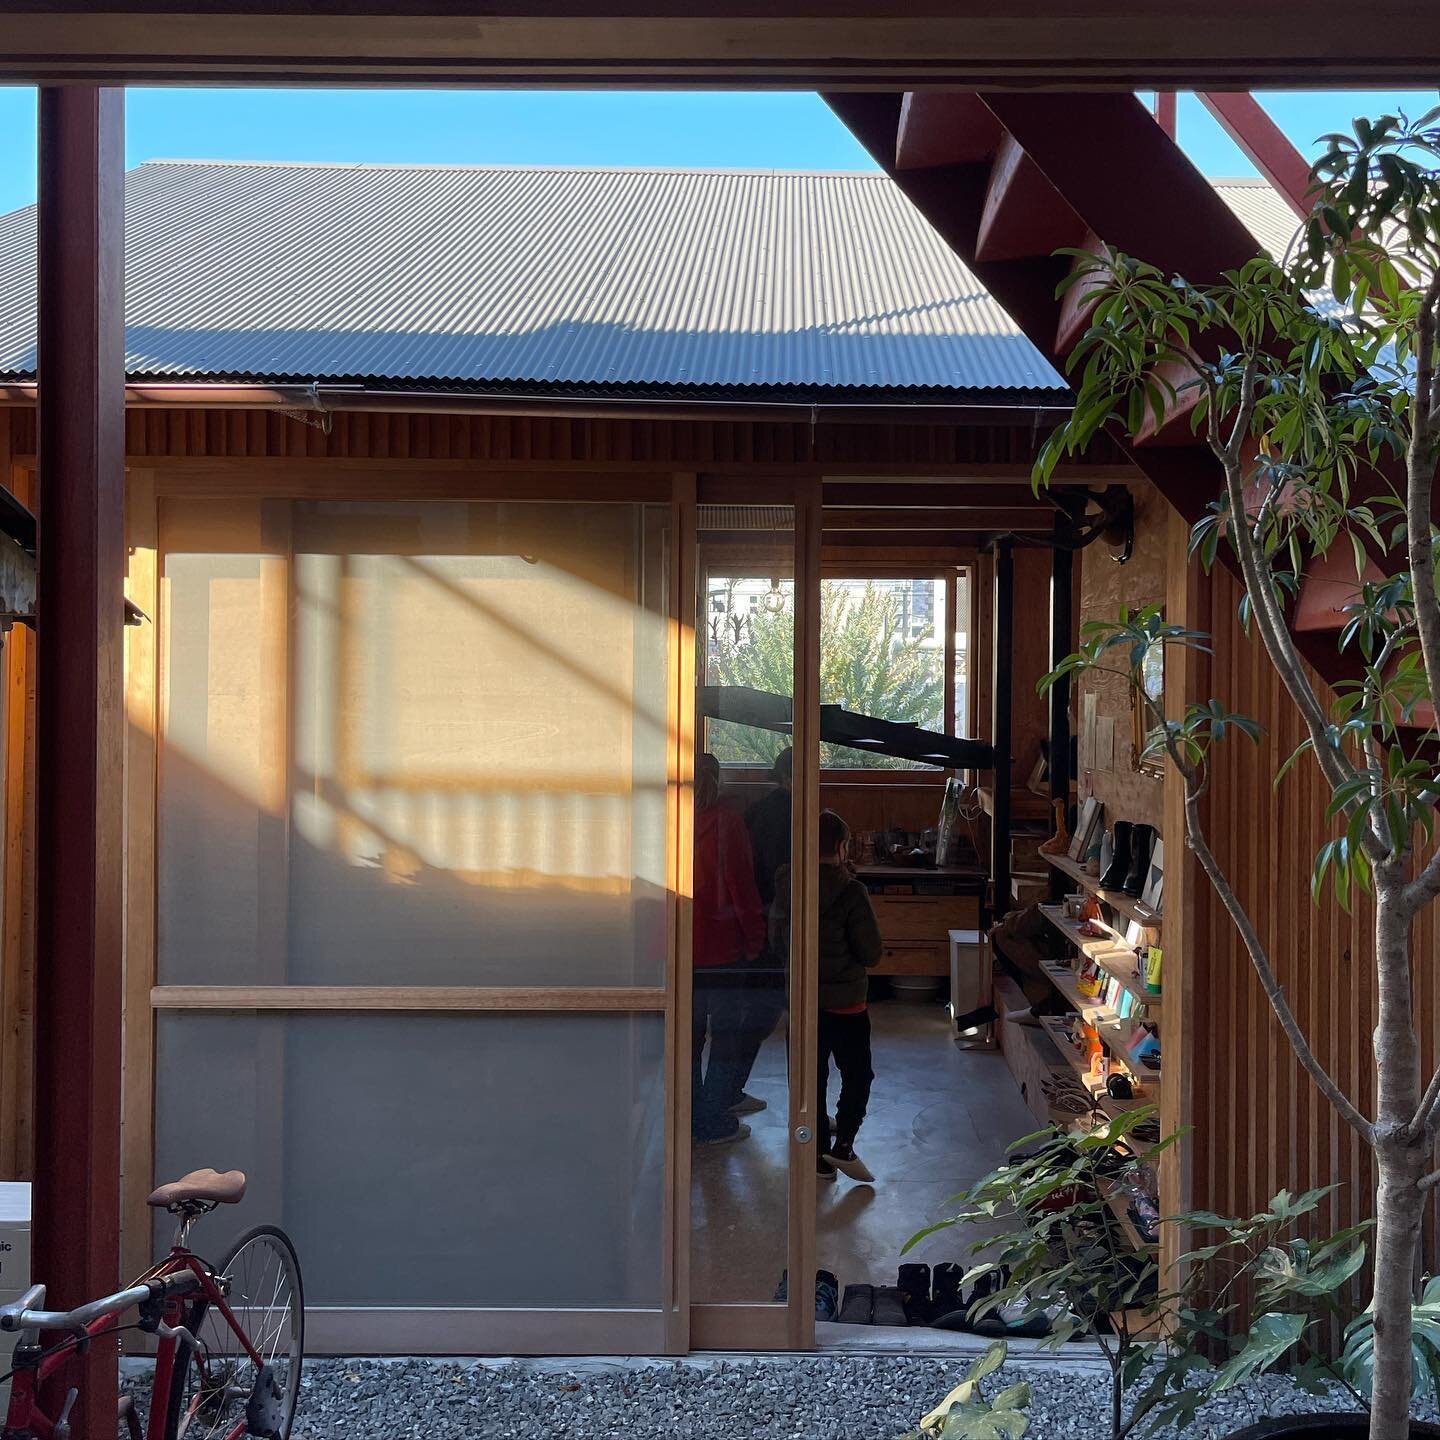 Today we were invited on the most fabulous architectural roadtrip one can imagine by the Japanese architect Norio Yoshinaga of Osaka. 

First stop was to visit a house he and his friend, artist and owner Gonda has transformed into a home and a studio